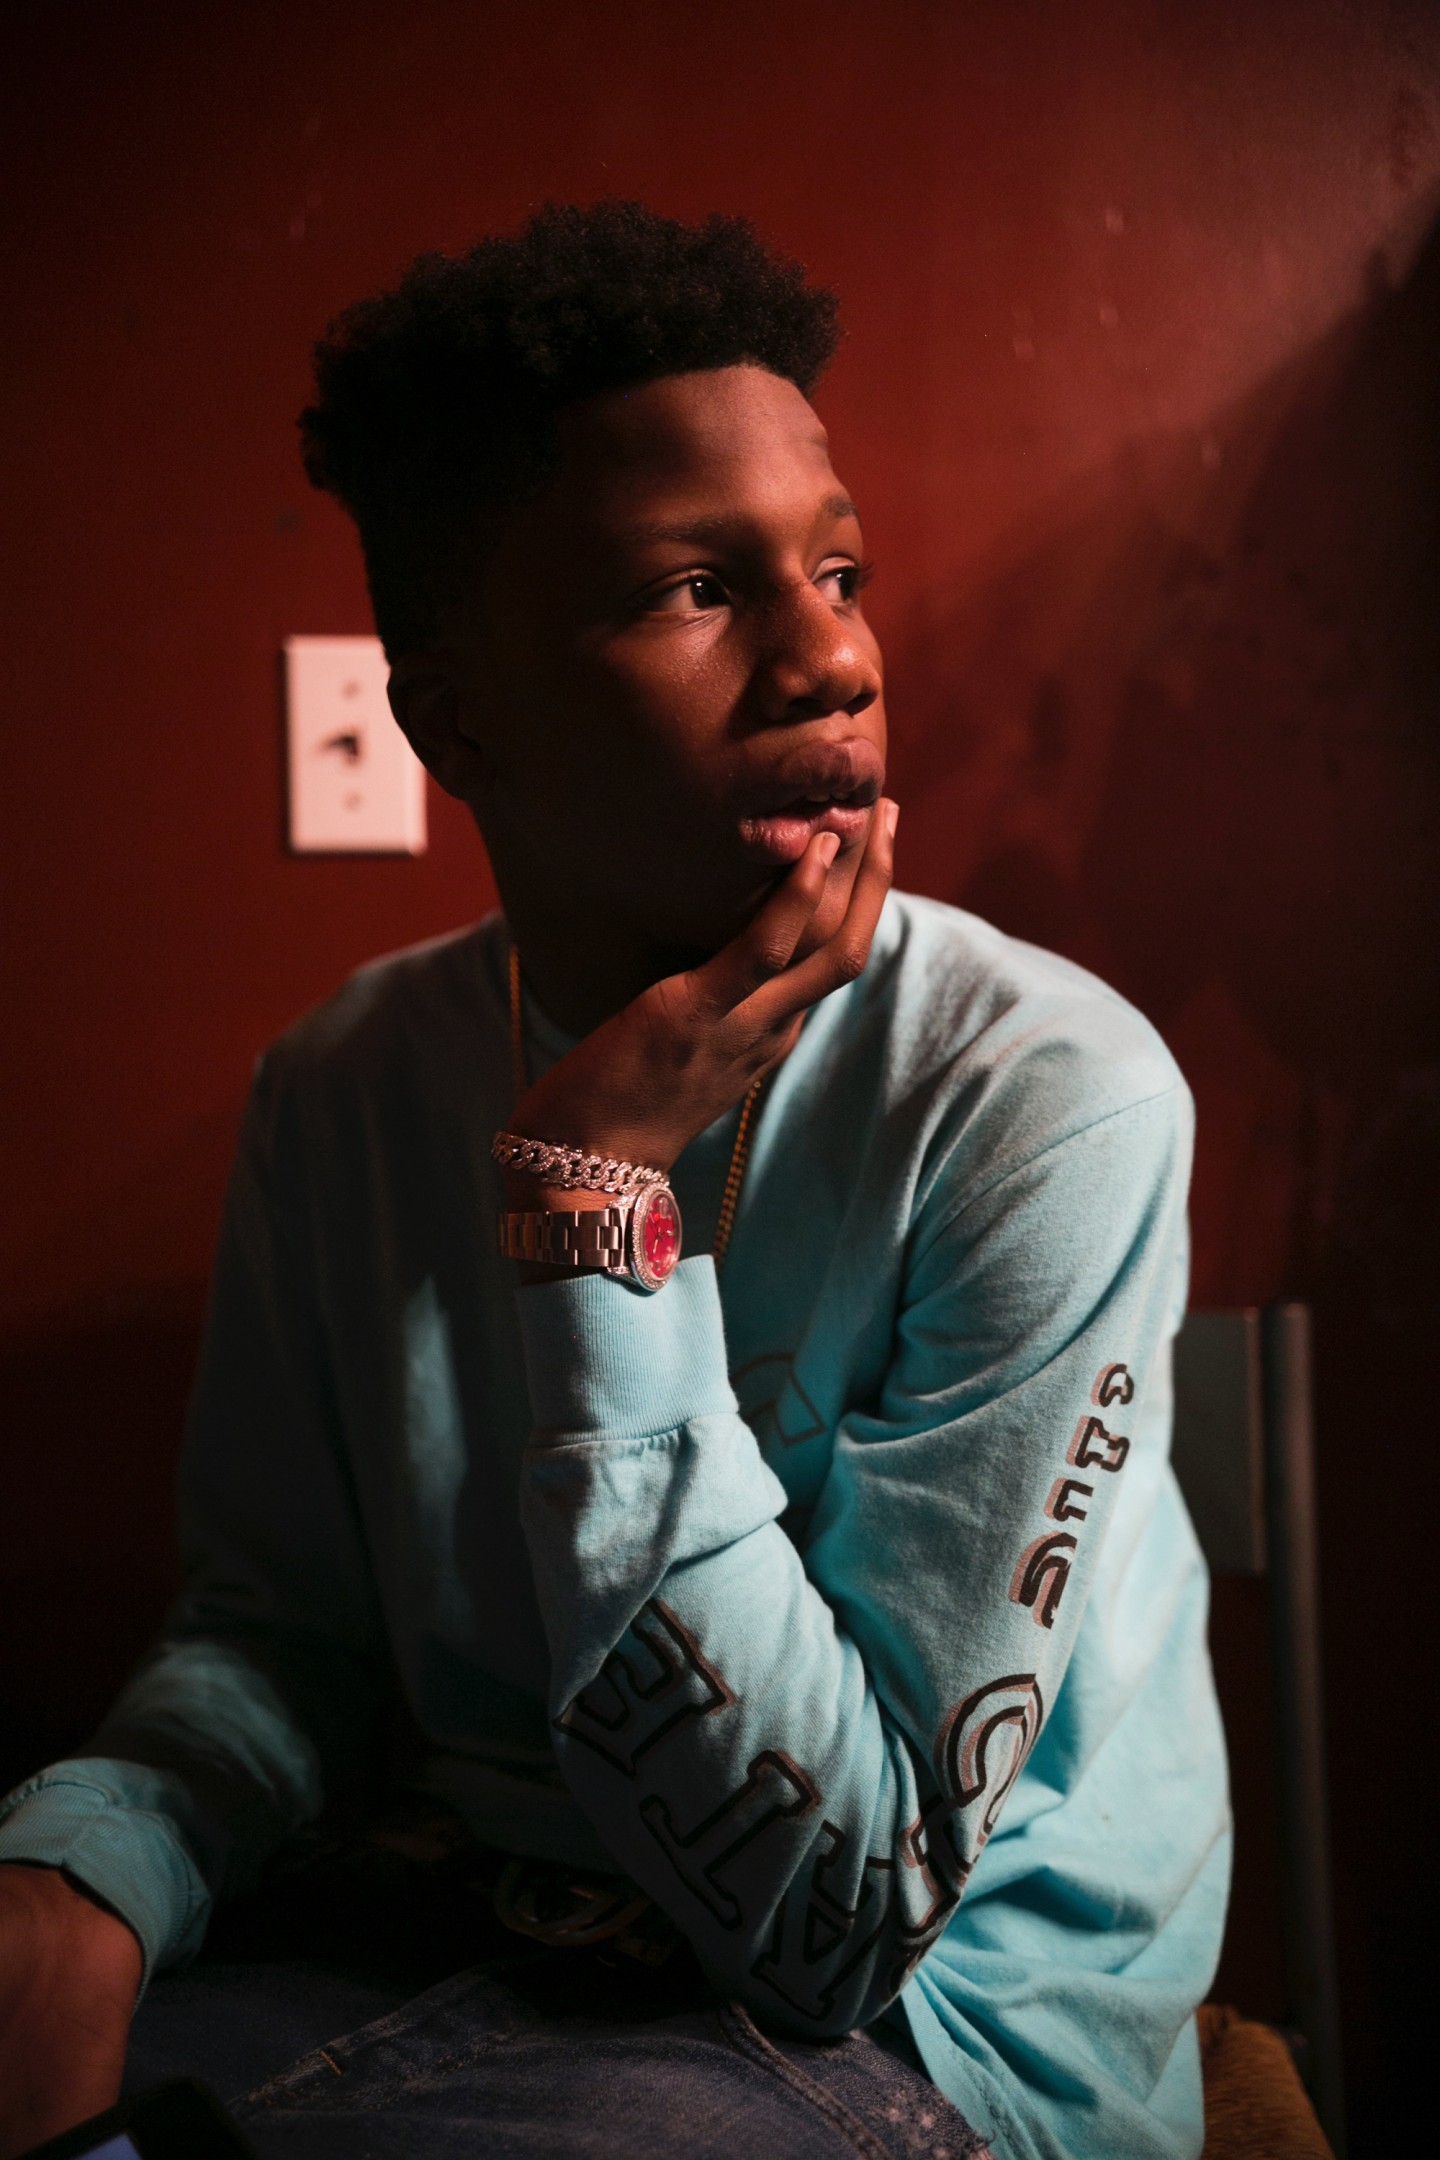 Meet Smooky MarGielaa, the 15-year-old Bronx artist making the most of every moment